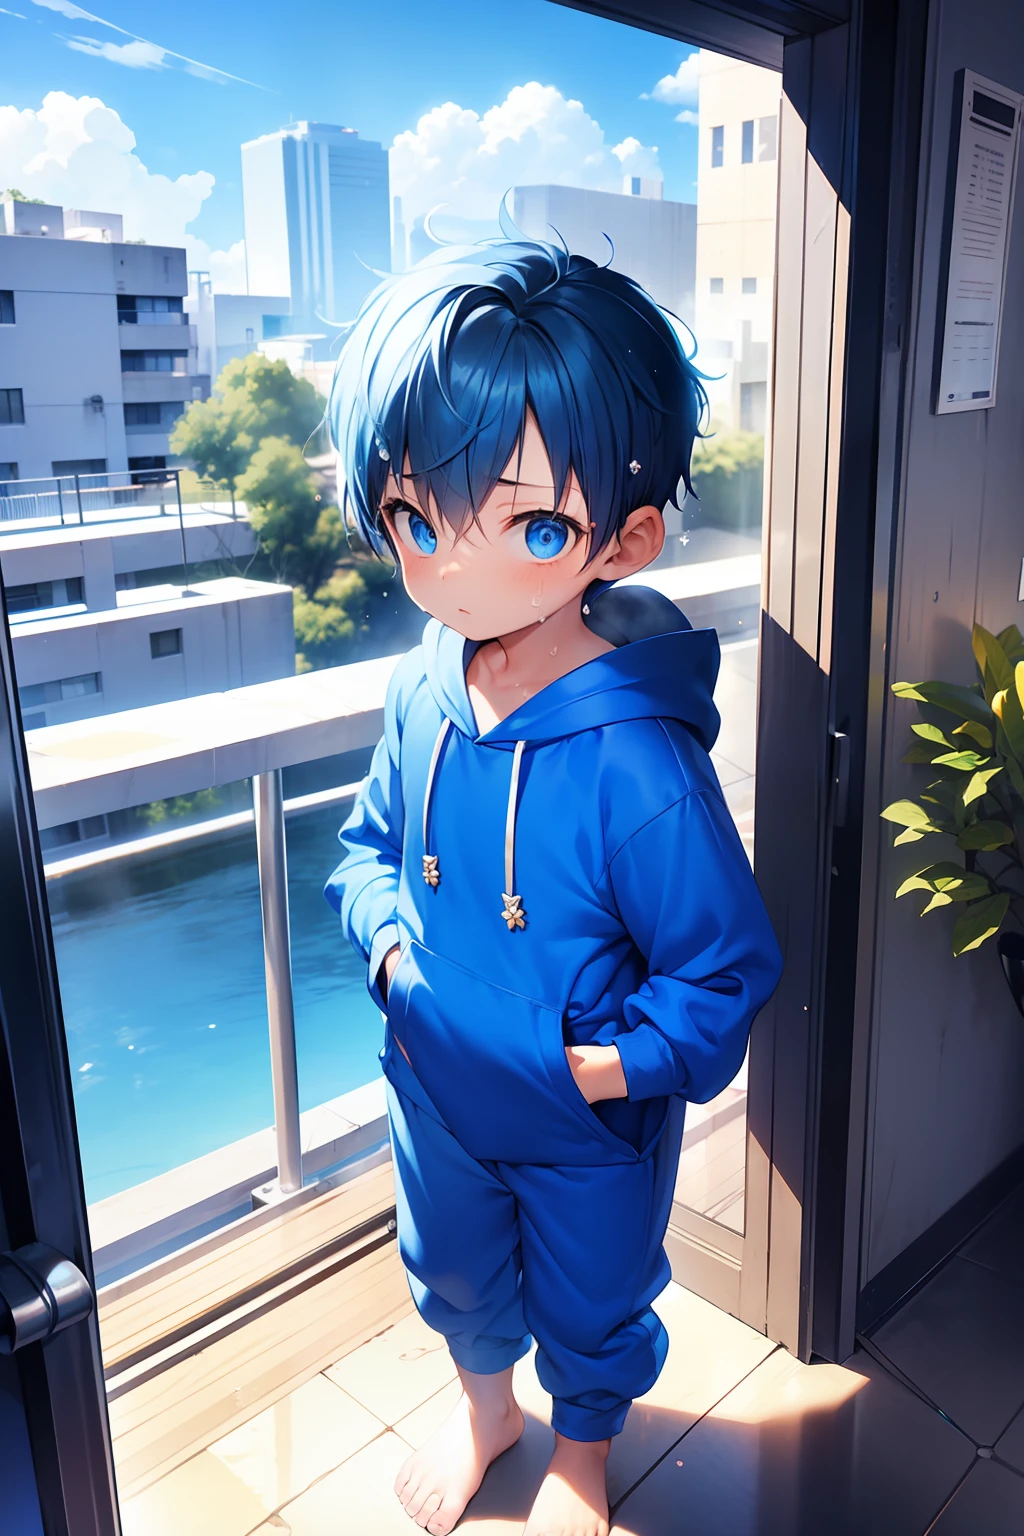 1 Little 男生 with blue hair and shiny bright blue eyes and barefoot and 小的 feet wearing a yellow oversized 連帽衫 and 运动裤 sitting on a window ledge, 臉紅, 年輕的, 男生, , 小的, 學步的兒童, 小腳, (运动裤:1.4), (年輕的:1.4), (孩子:1.4), (正太:1.4), (連帽衫:1.4),